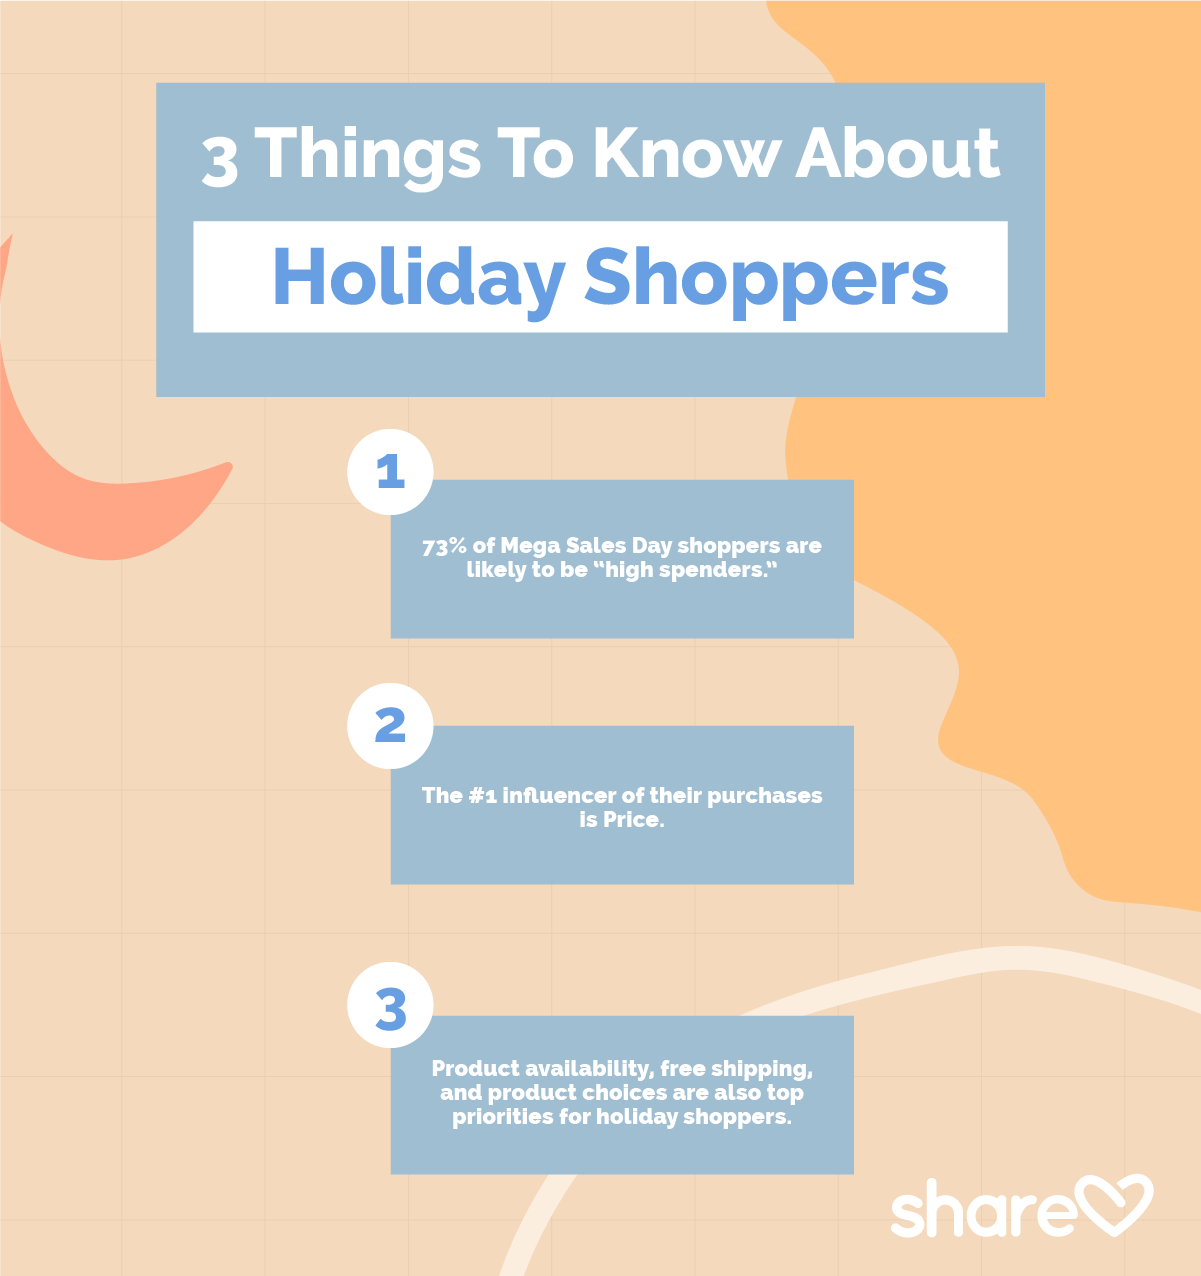 3 Things To Know About Holiday Shoppers infographic